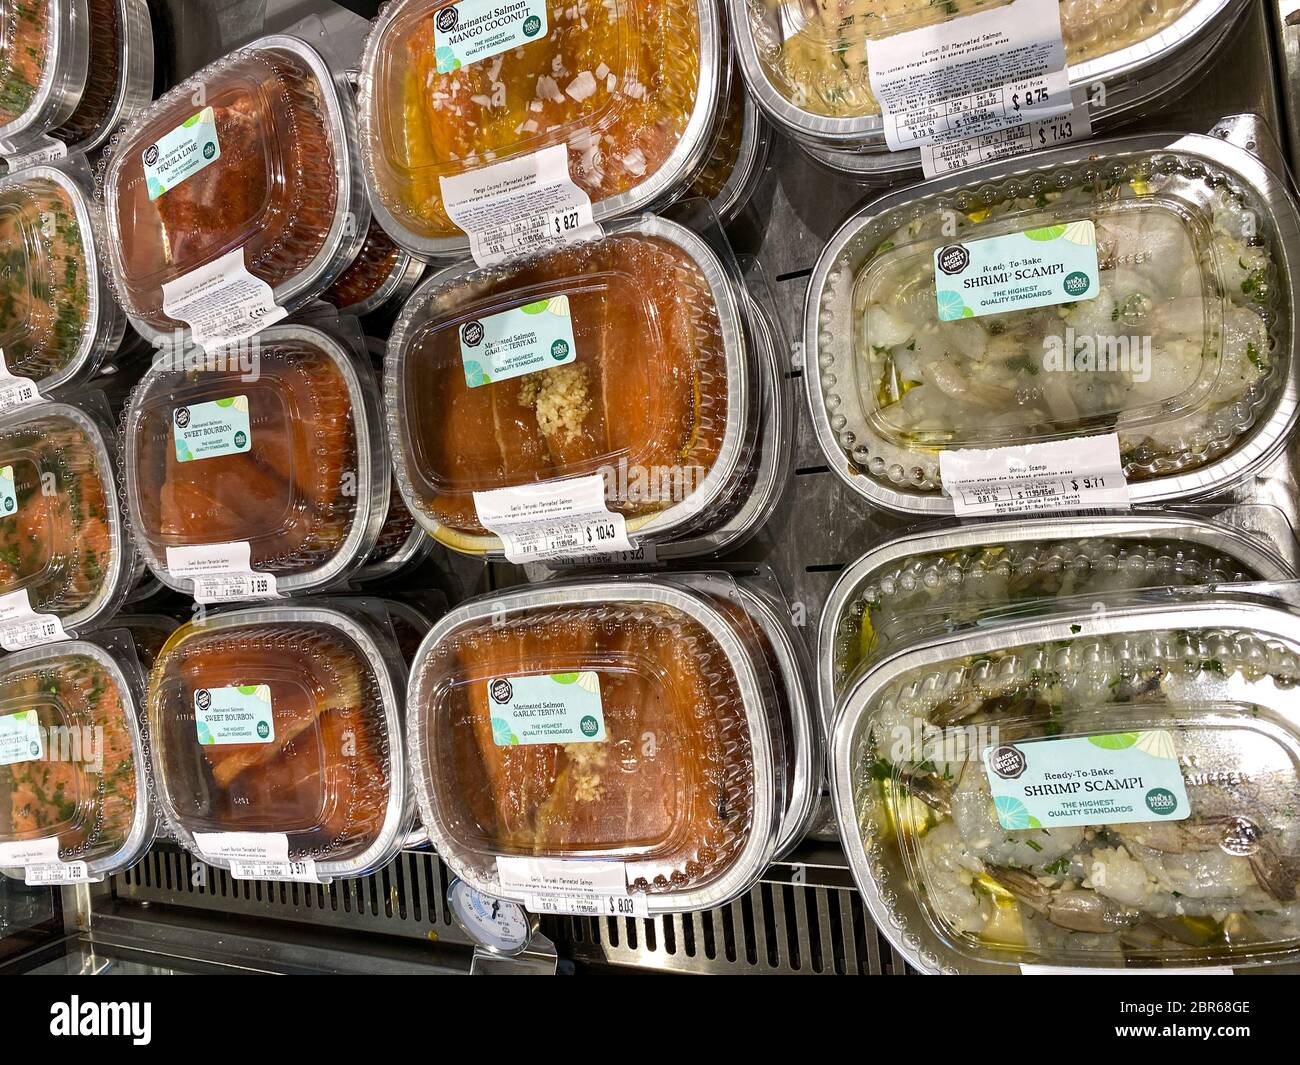 https://c8.alamy.com/comp/2BR68GE/orlando-flusa-5320-a-display-of-ready-to-bake-seafood-dinners-at-a-whole-foods-market-grocery-store-waiting-for-customers-to-purchase-2BR68GE.jpg